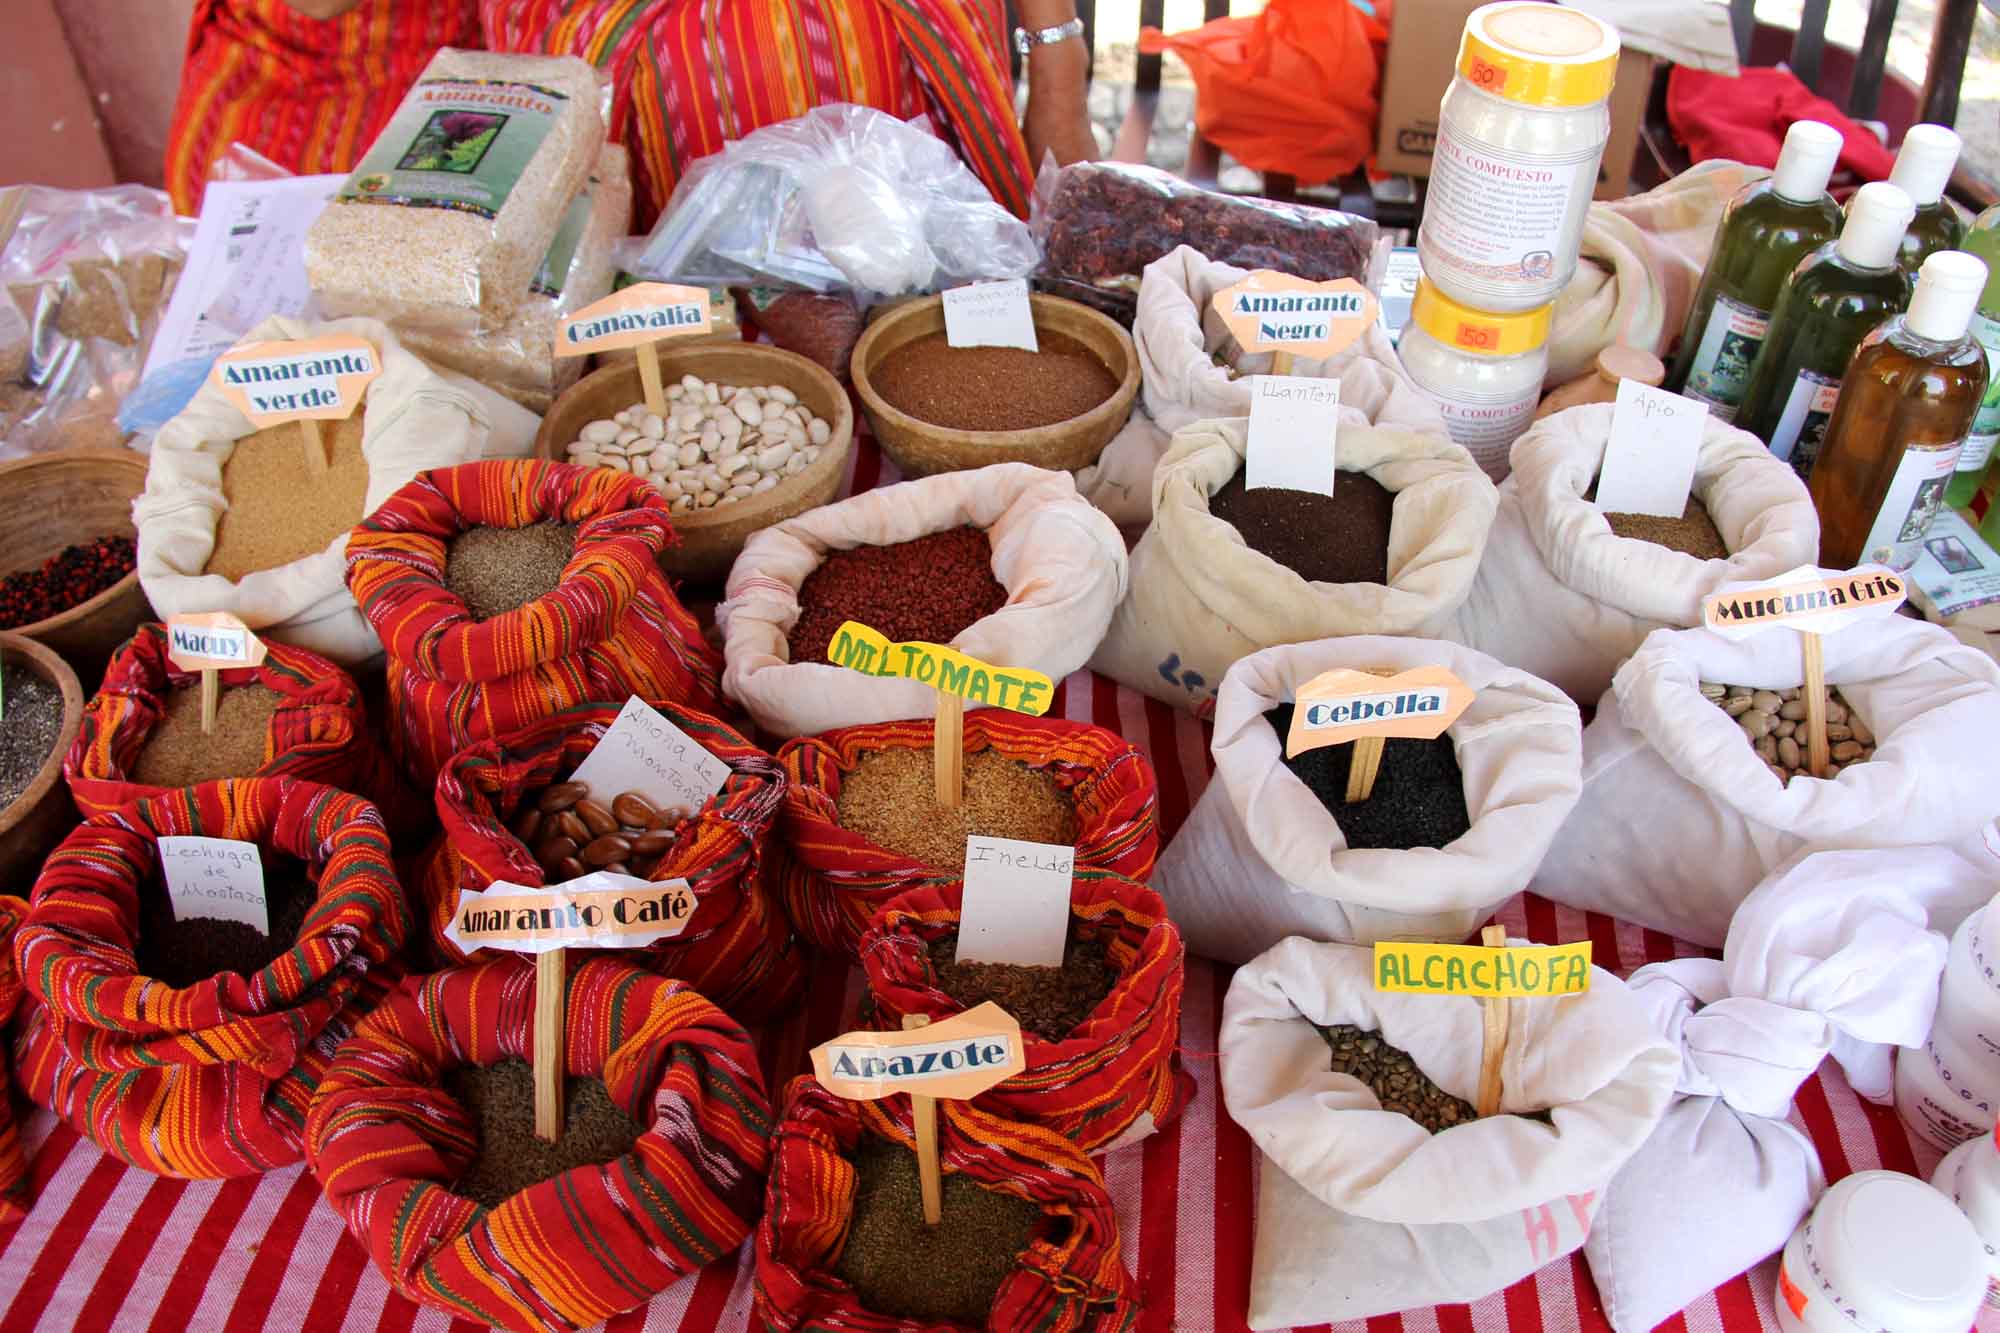 Qachuu Aloom products for sale at a Seed Fair